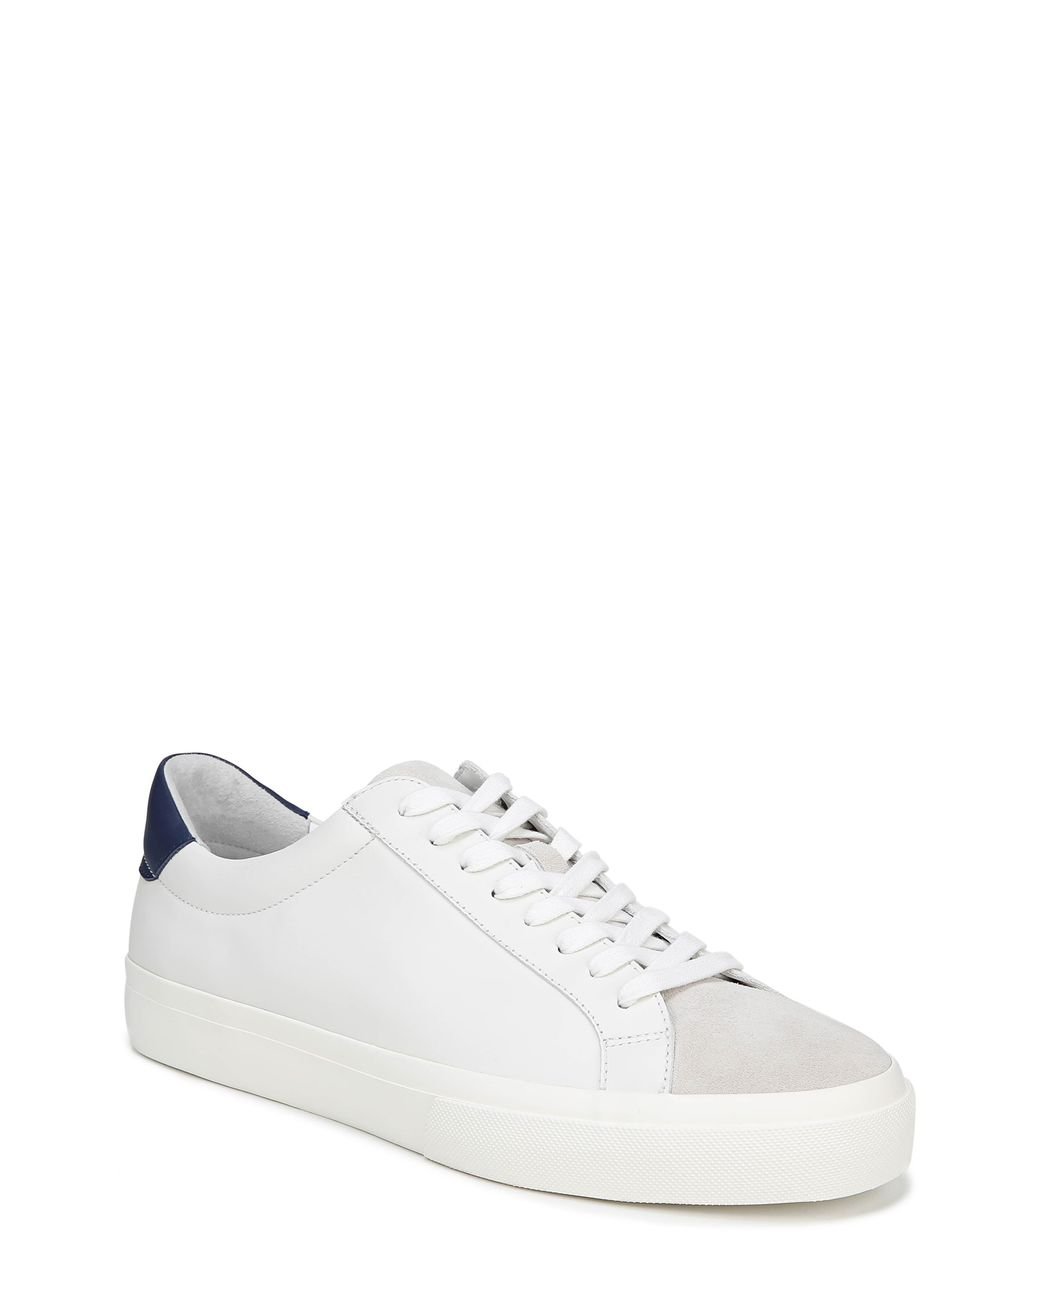 Vince Leather Fulton Sneaker in White 